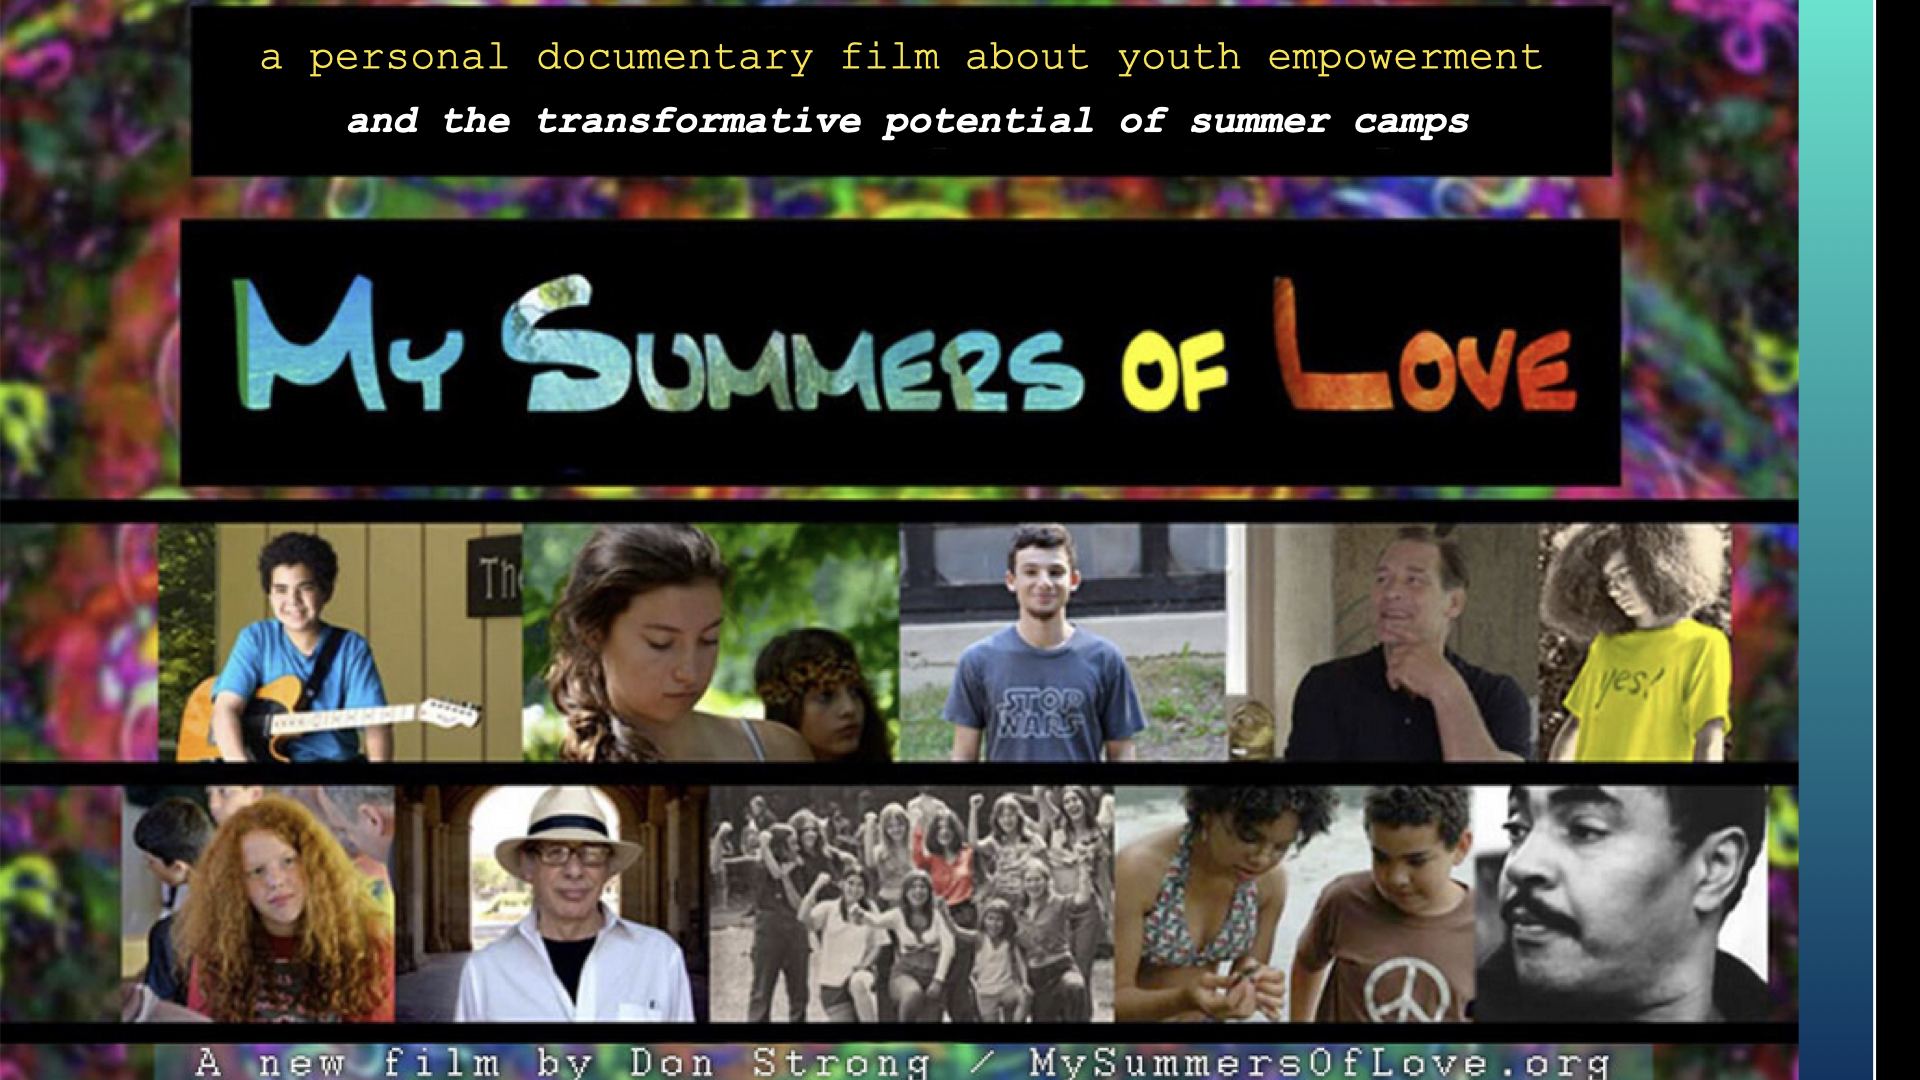 Text title "My Summers of Love - A personal documentary film about youth empowerment and the transformative potential of summer camps - A new film by Don Strong / MySummersOfLove.org" Photos of several youth and adults at camp.